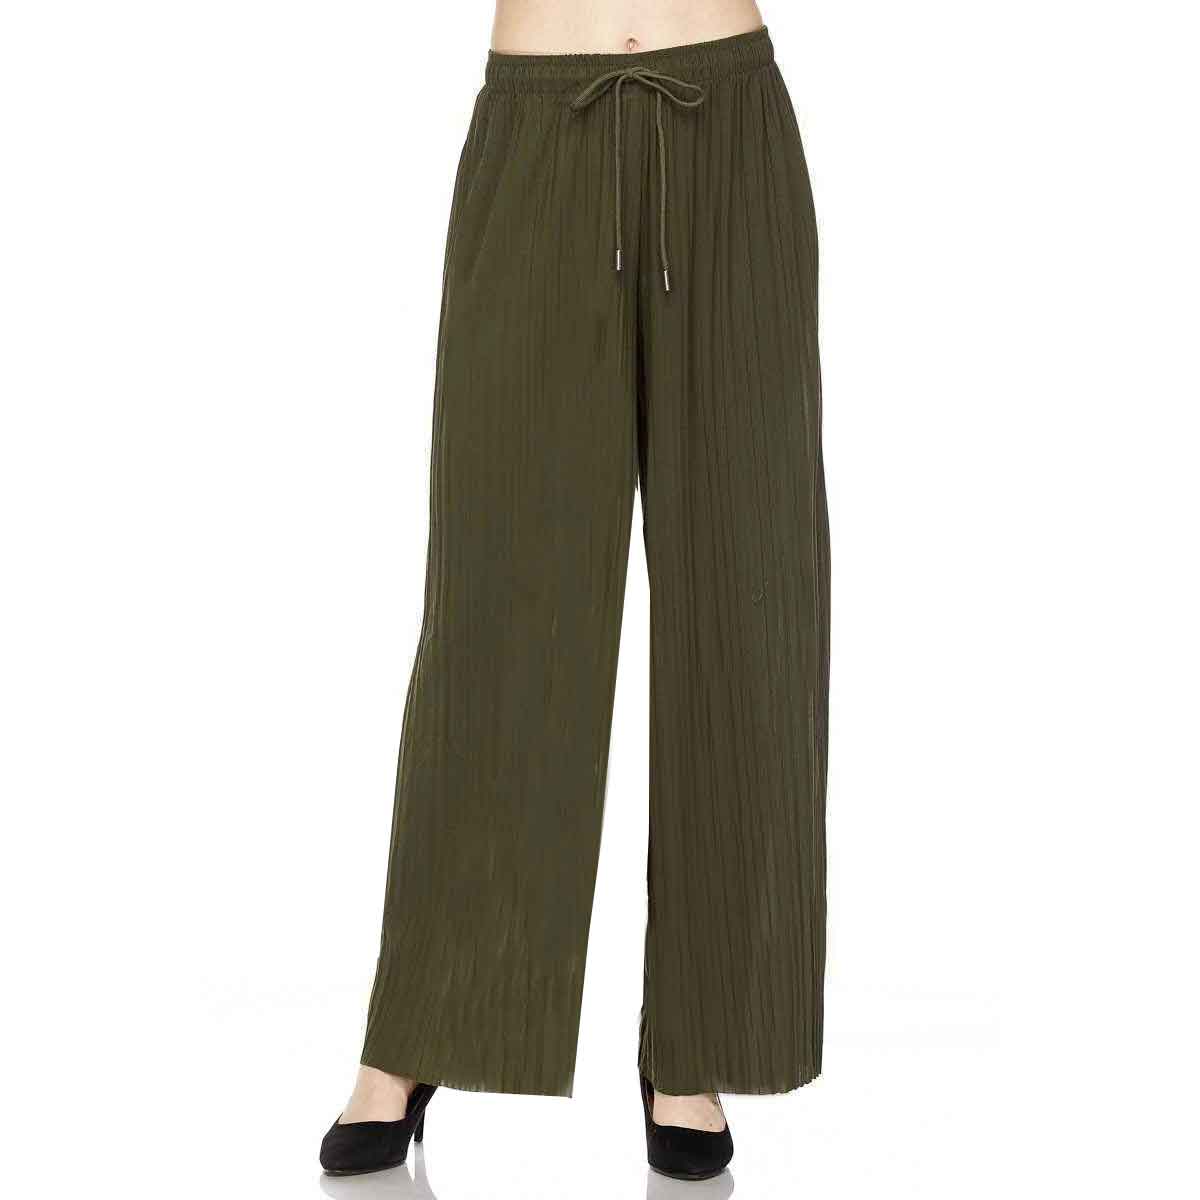 Olive<br>
Stretch Twill Pleated Wide Leg Pants